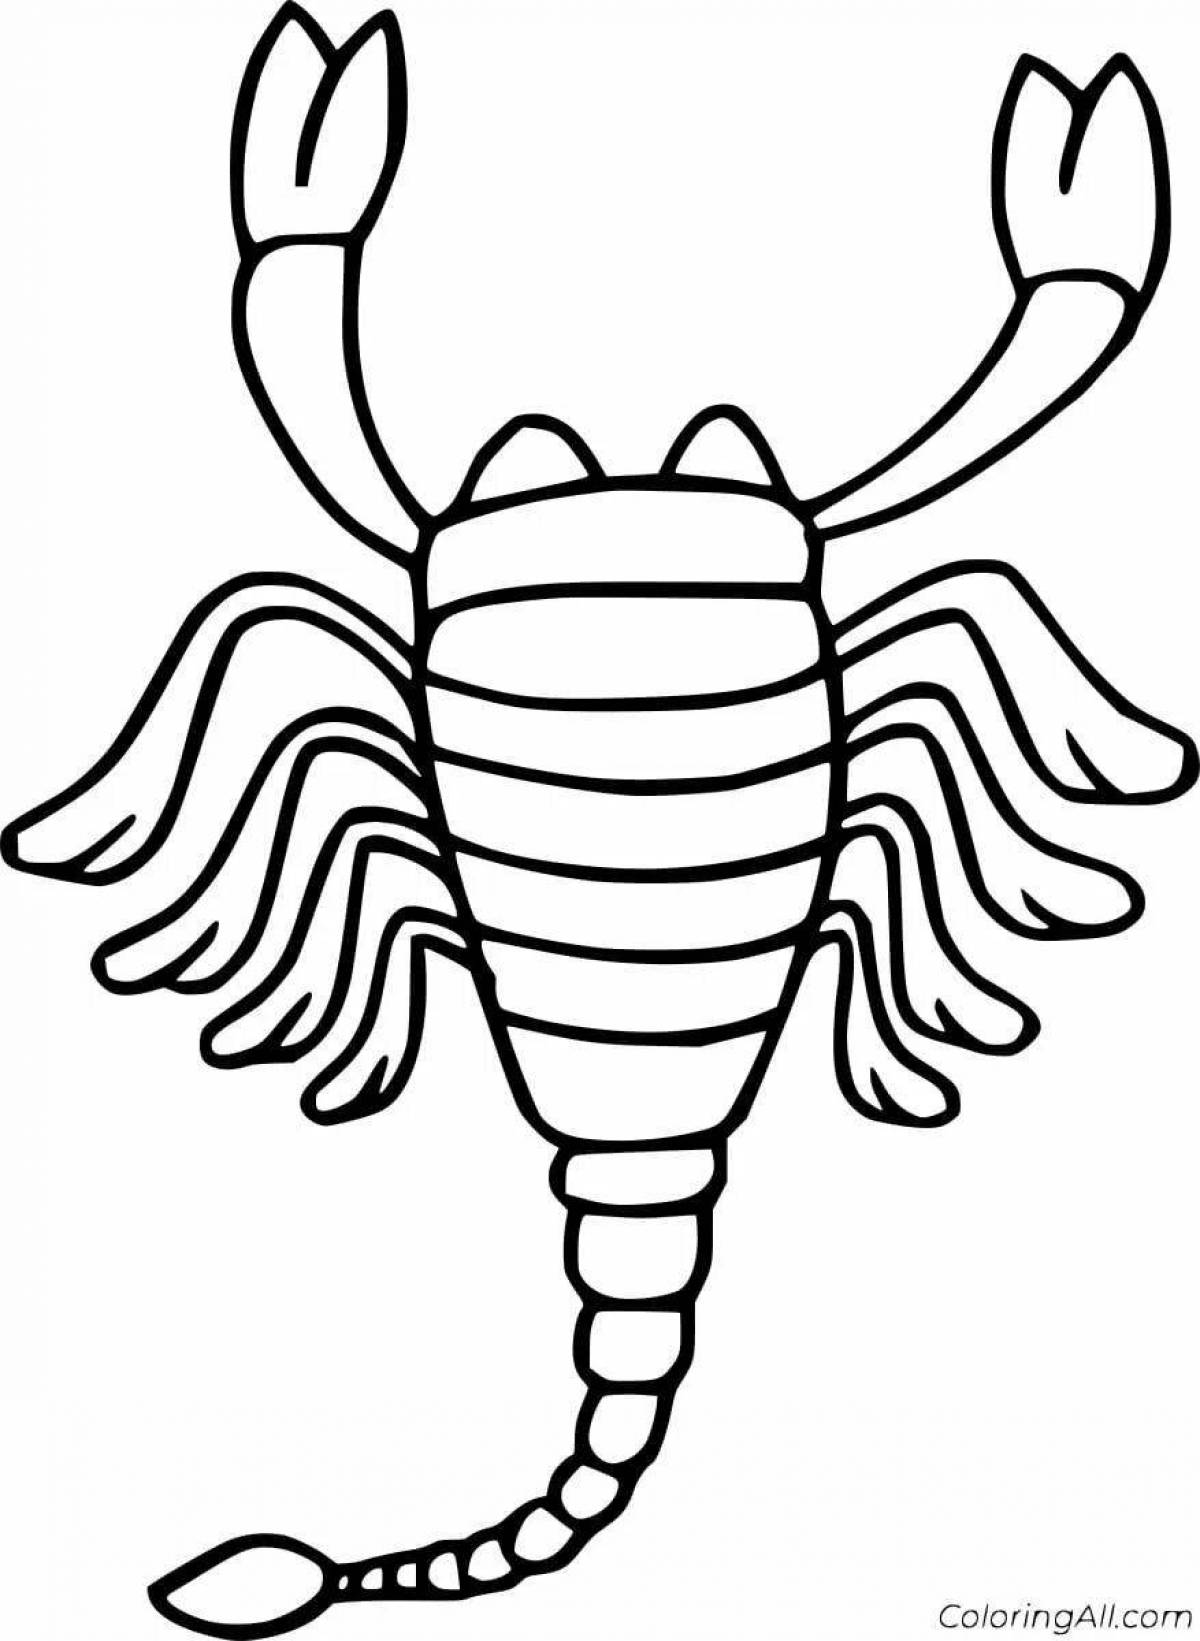 Colorful scorpion coloring page